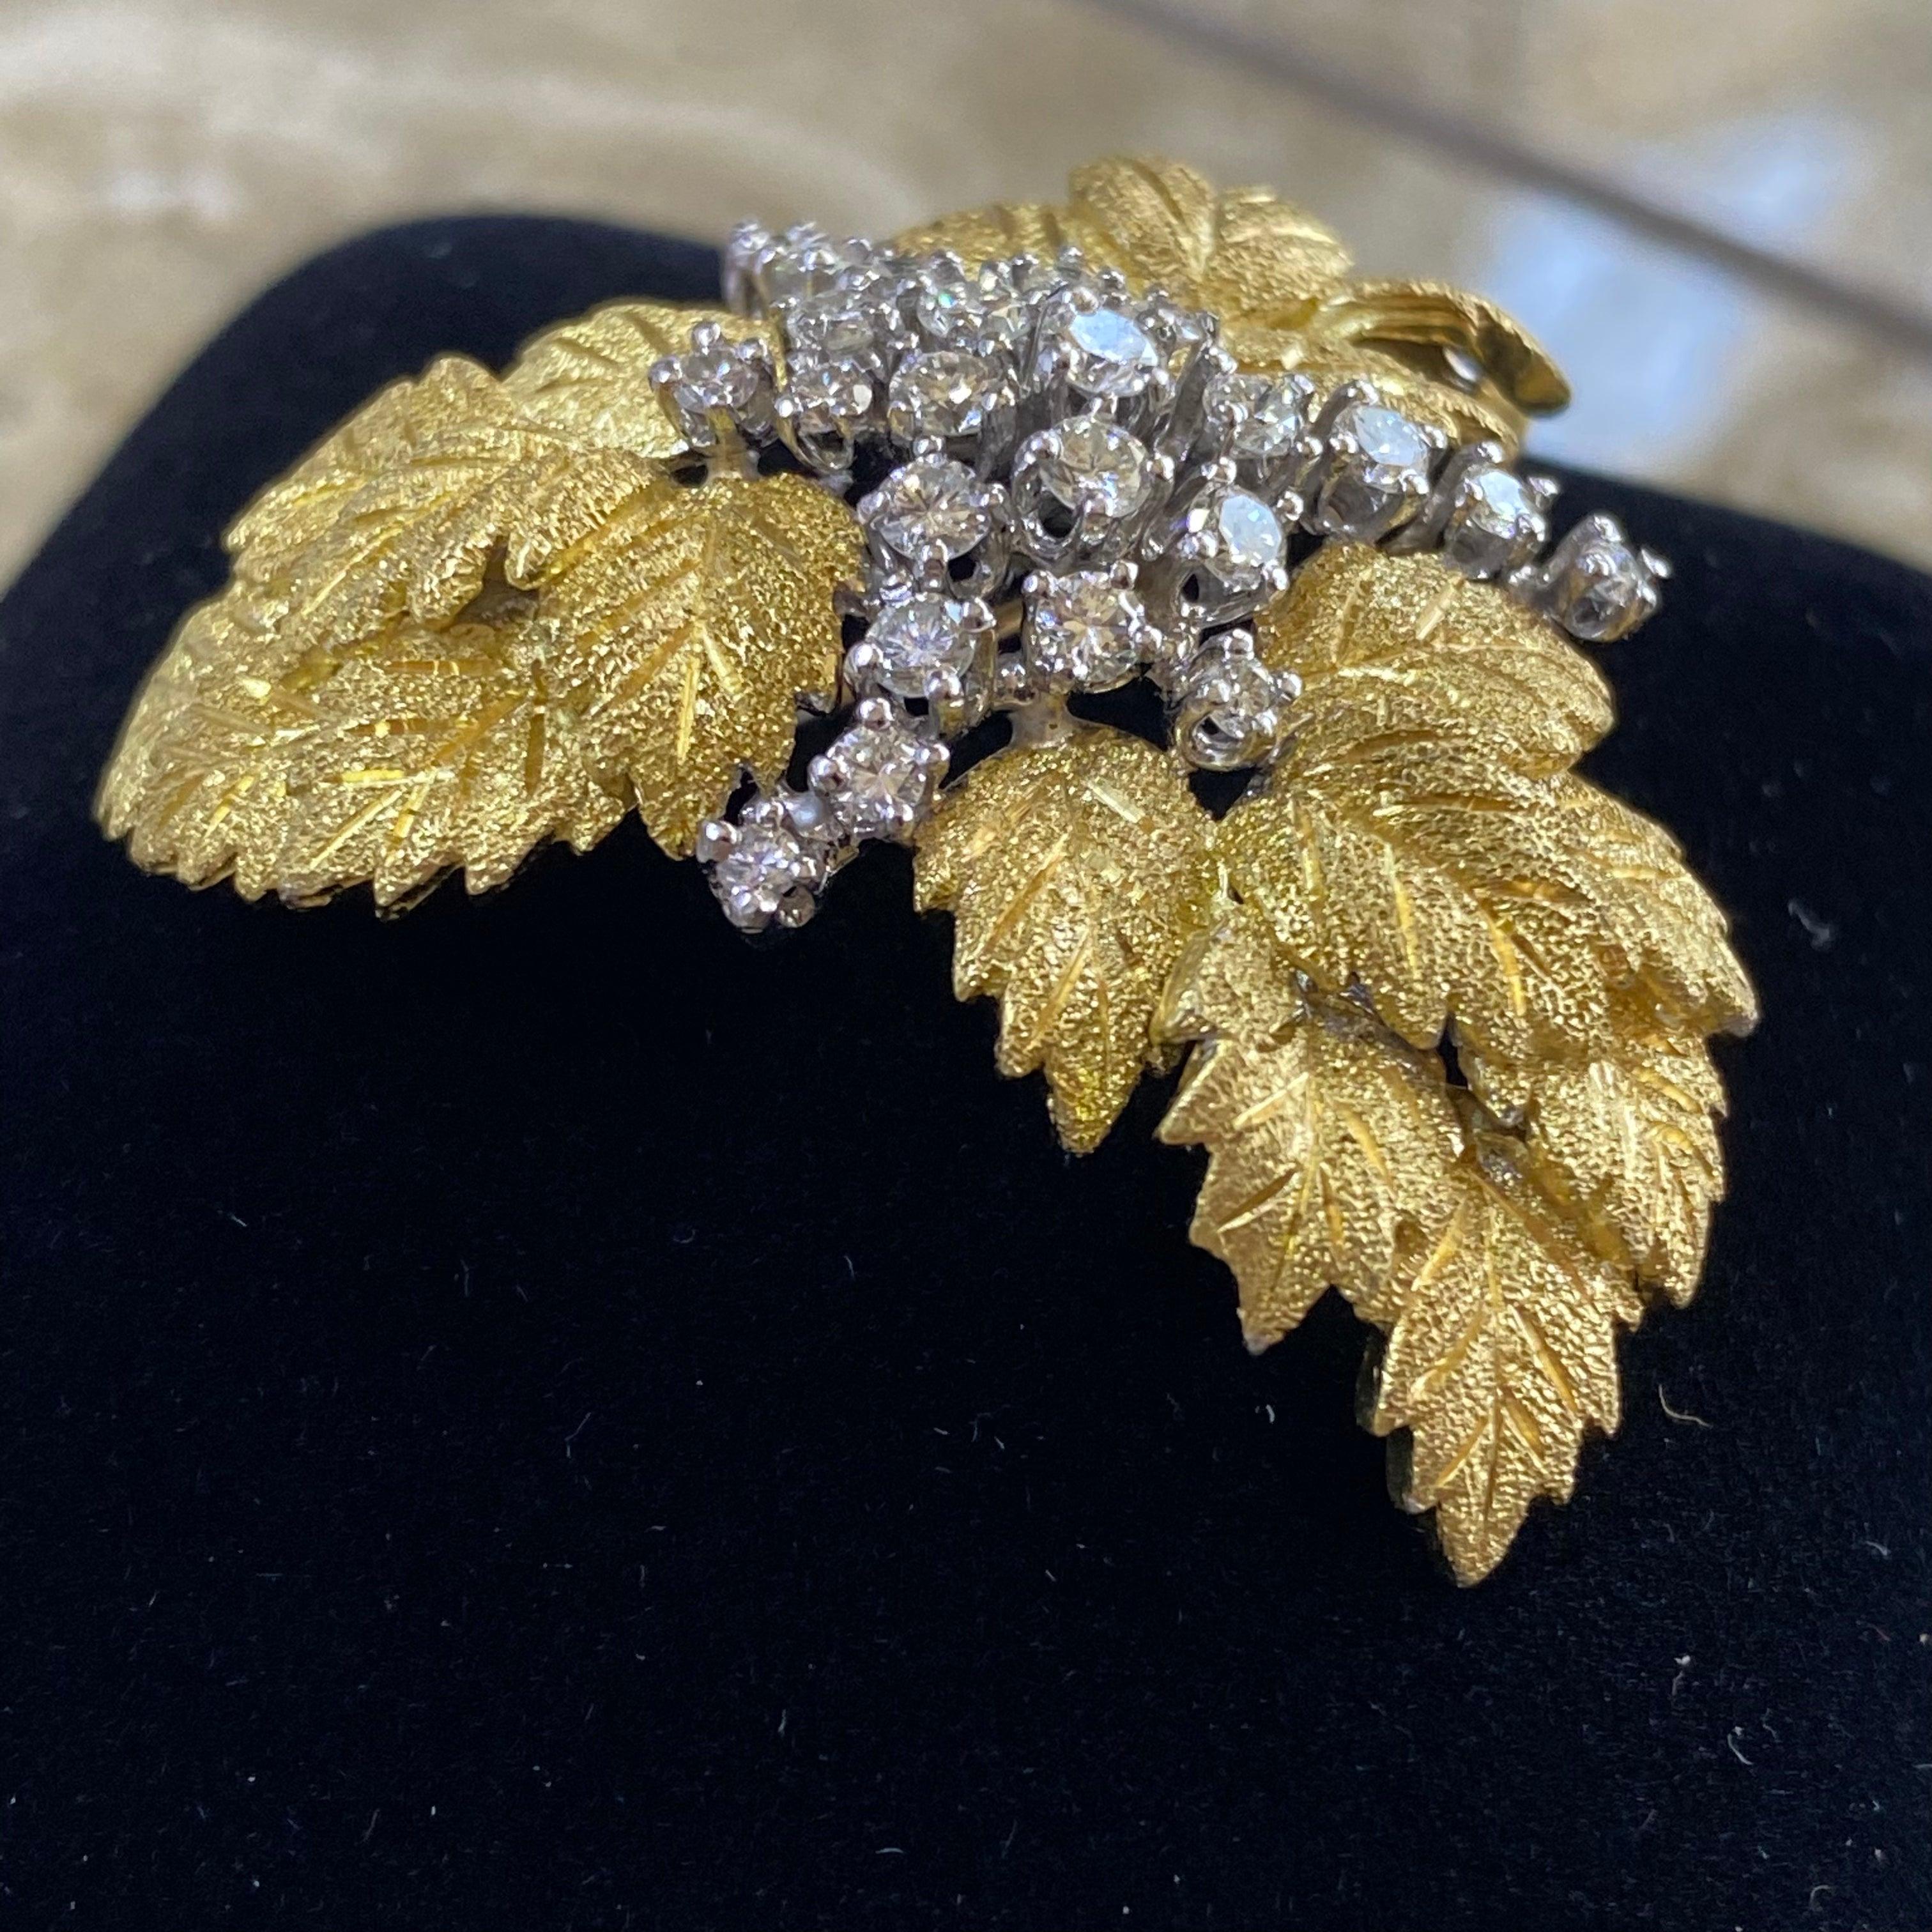 Crafted in 18K gold, the brooch features a domed cluster of textured finished yellow gold leaves topped with ribbons of diamonds set in white gold. The brooch has a couple of gold loops on the back to attach it to a chain to wear it as a pendant.